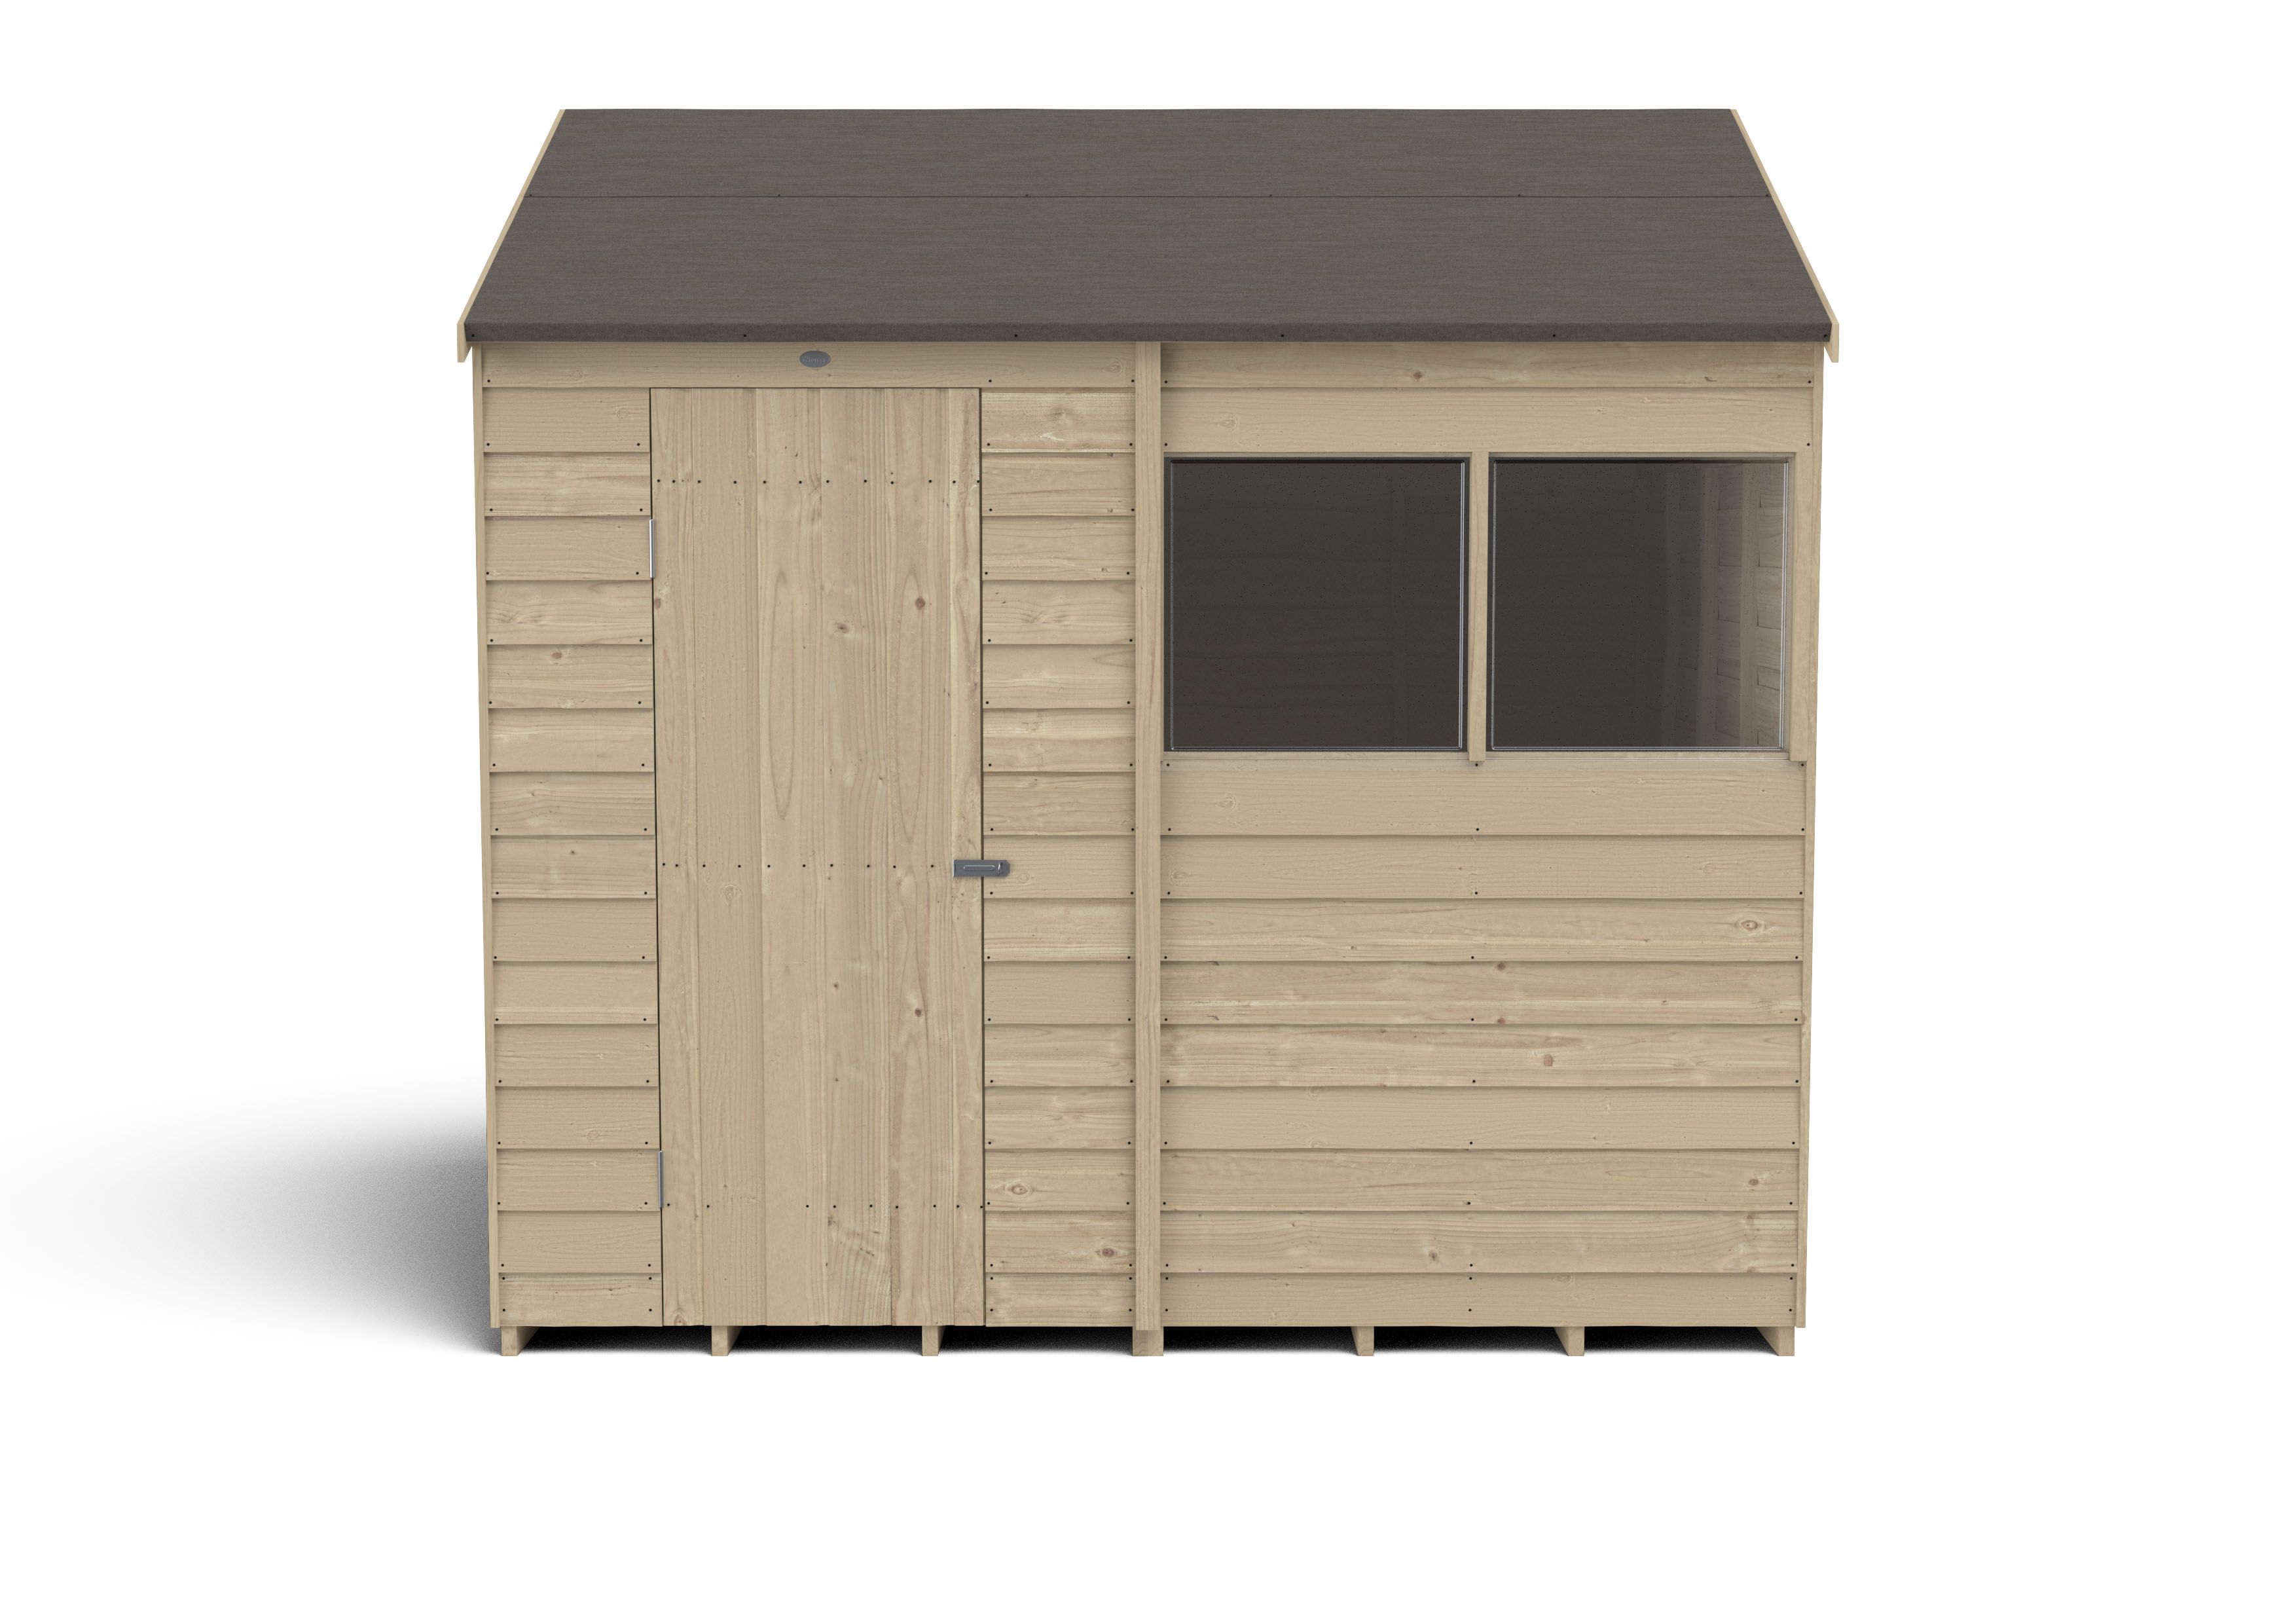 Forest Garden Overlap 8x6 ft Reverse apex Wooden Shed with floor & 2 windows